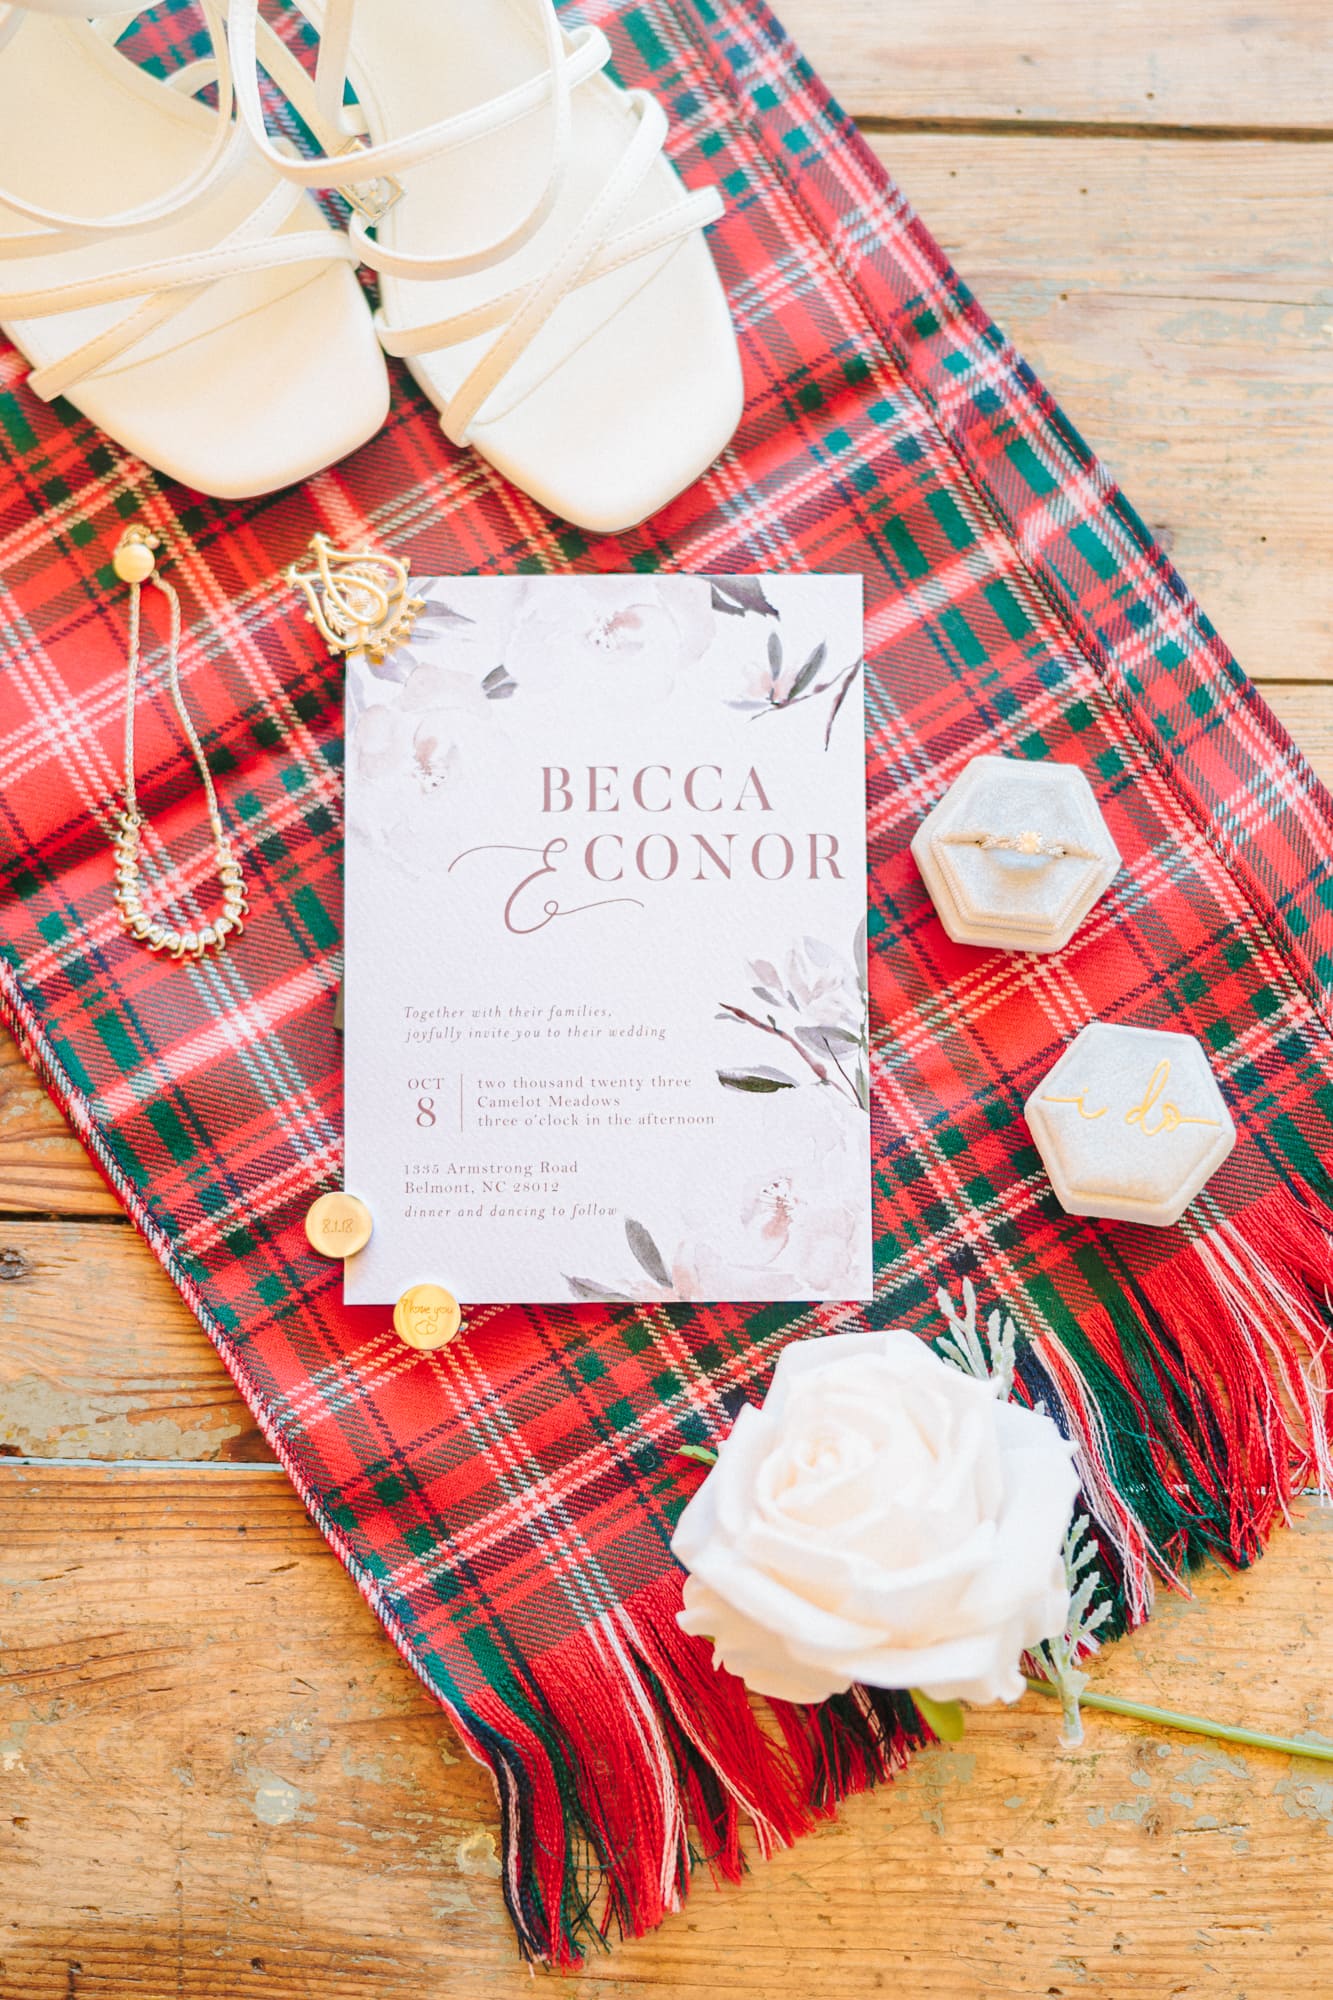 Becca and Conor's wedding invitation inviting guests to their barn wedding venue.